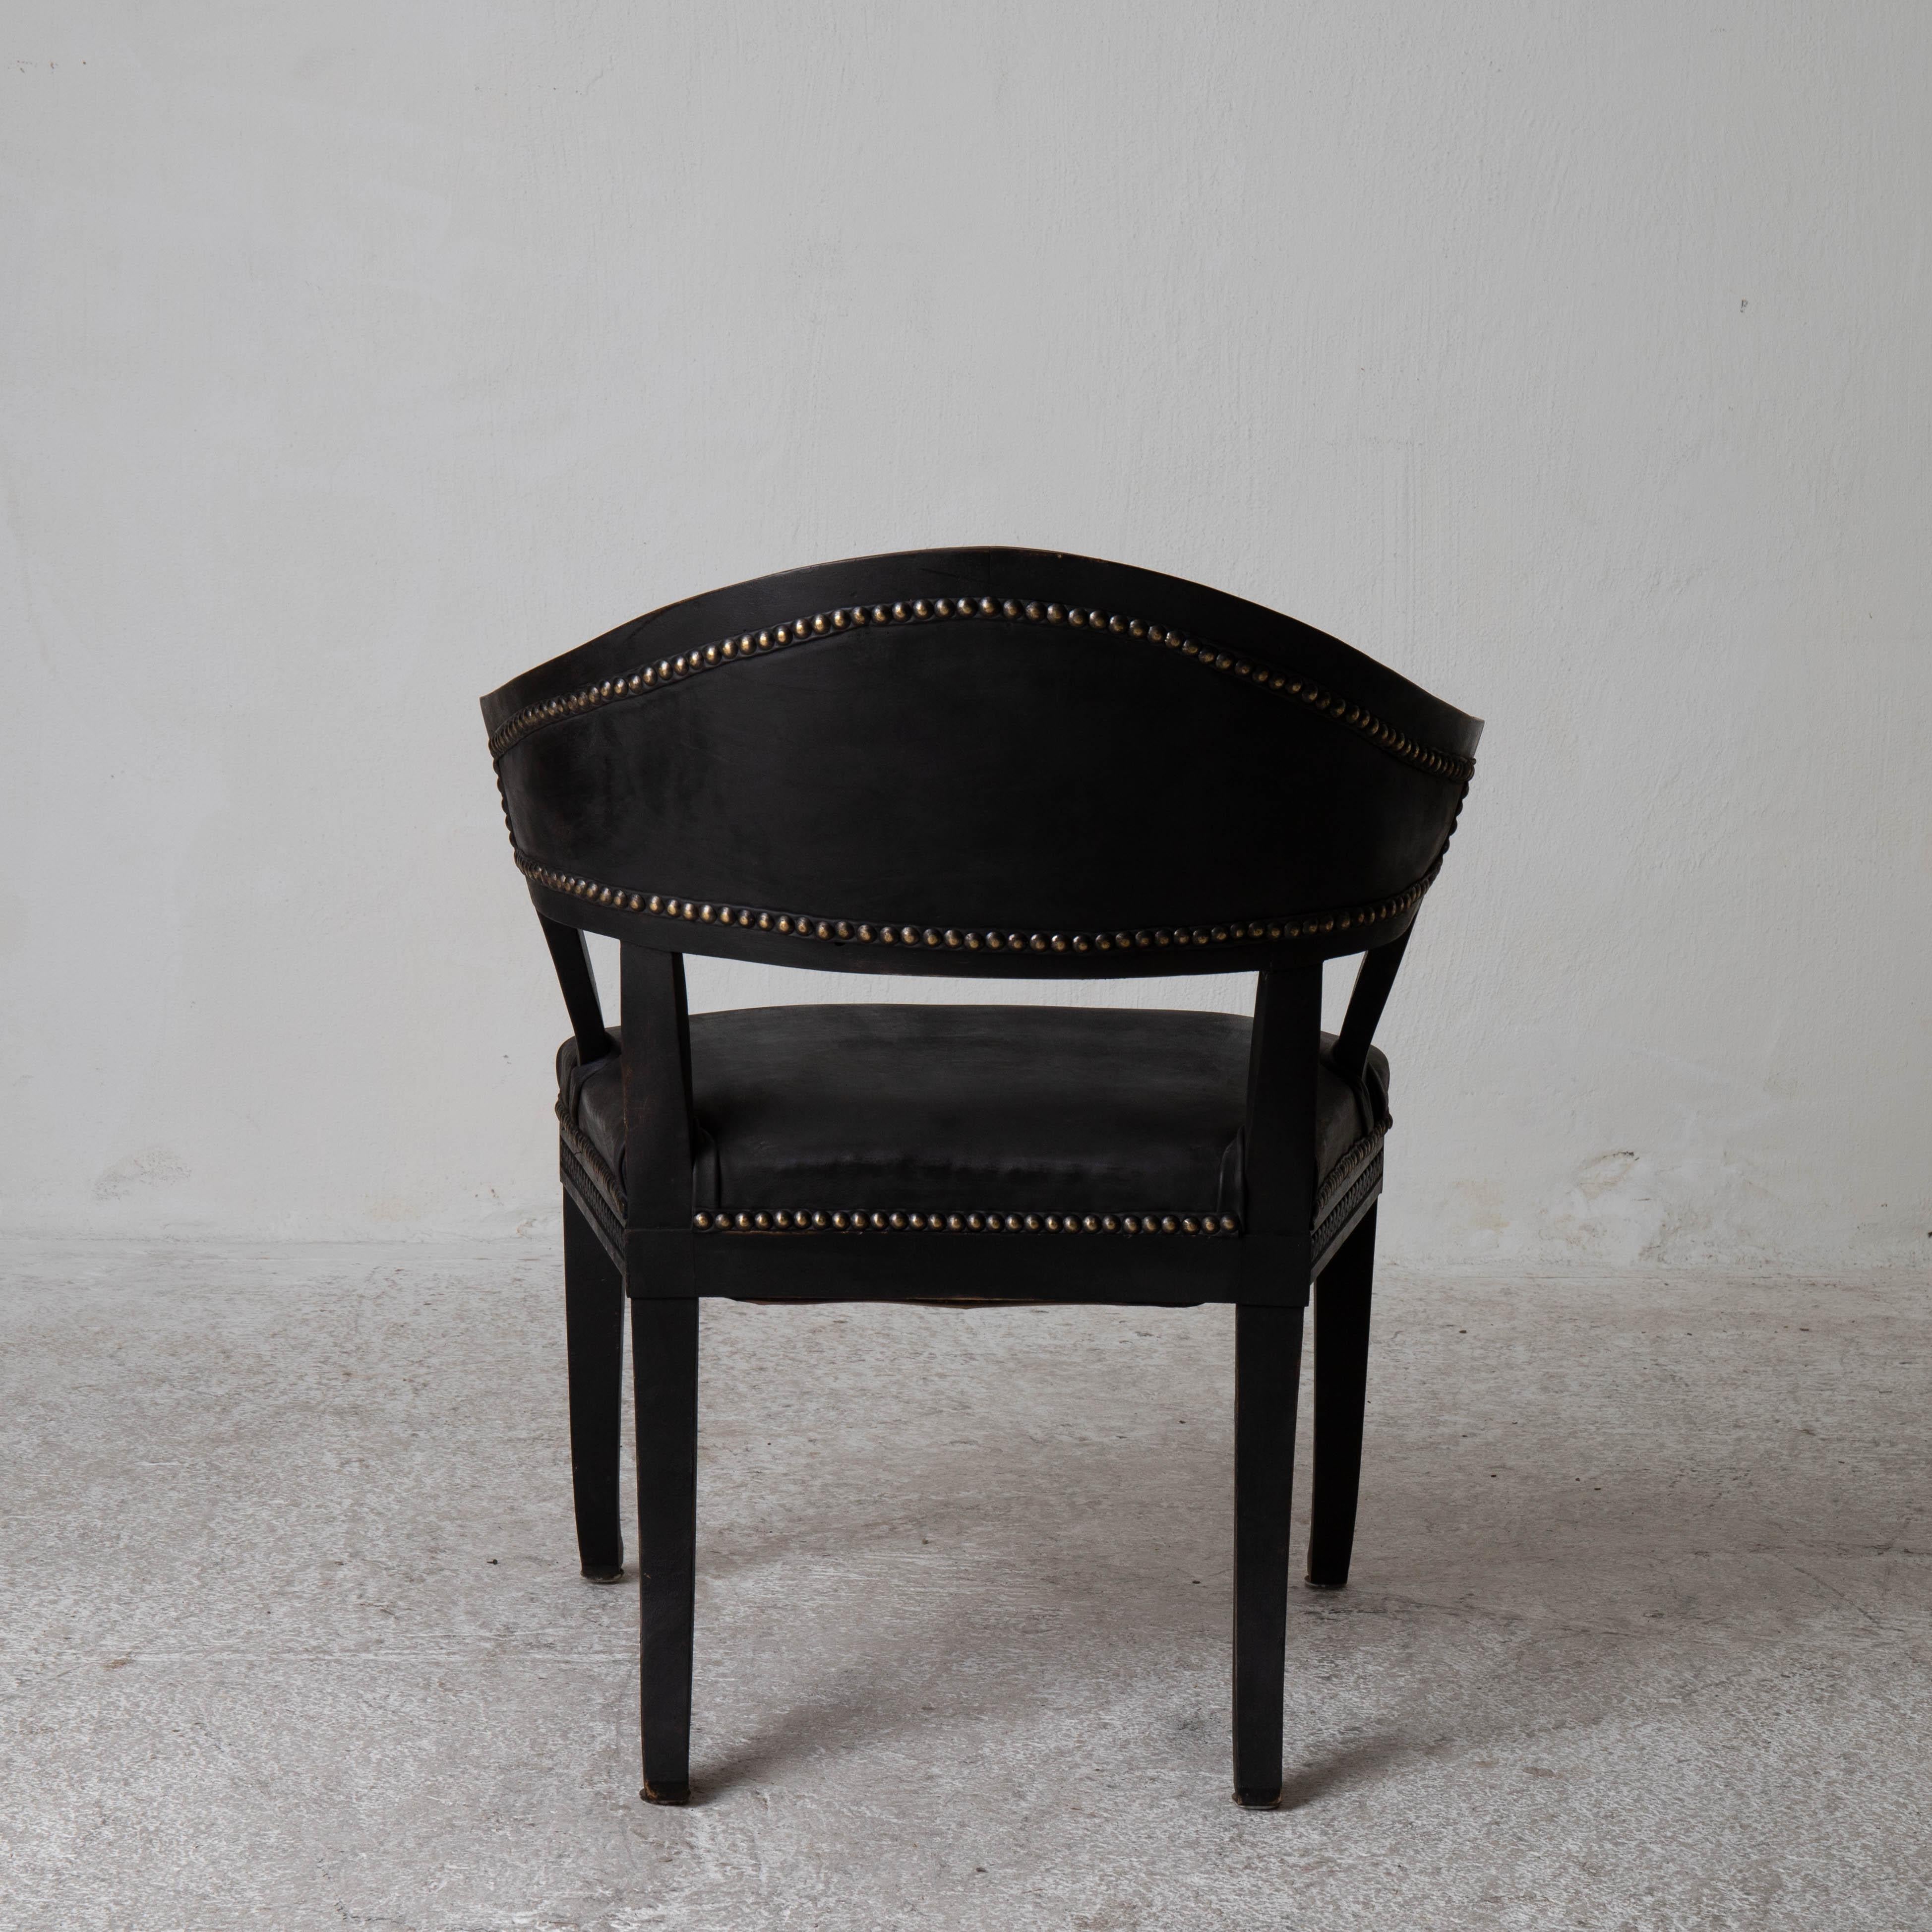 Chair Swedish Gustavian Style black barrel Back Sweden. A barrel backed chair made in the Gustavian style during the late 19th century in Sweden. Refinished in our Laserow Black and upholstered in a waxed leather. Nailhead detail.